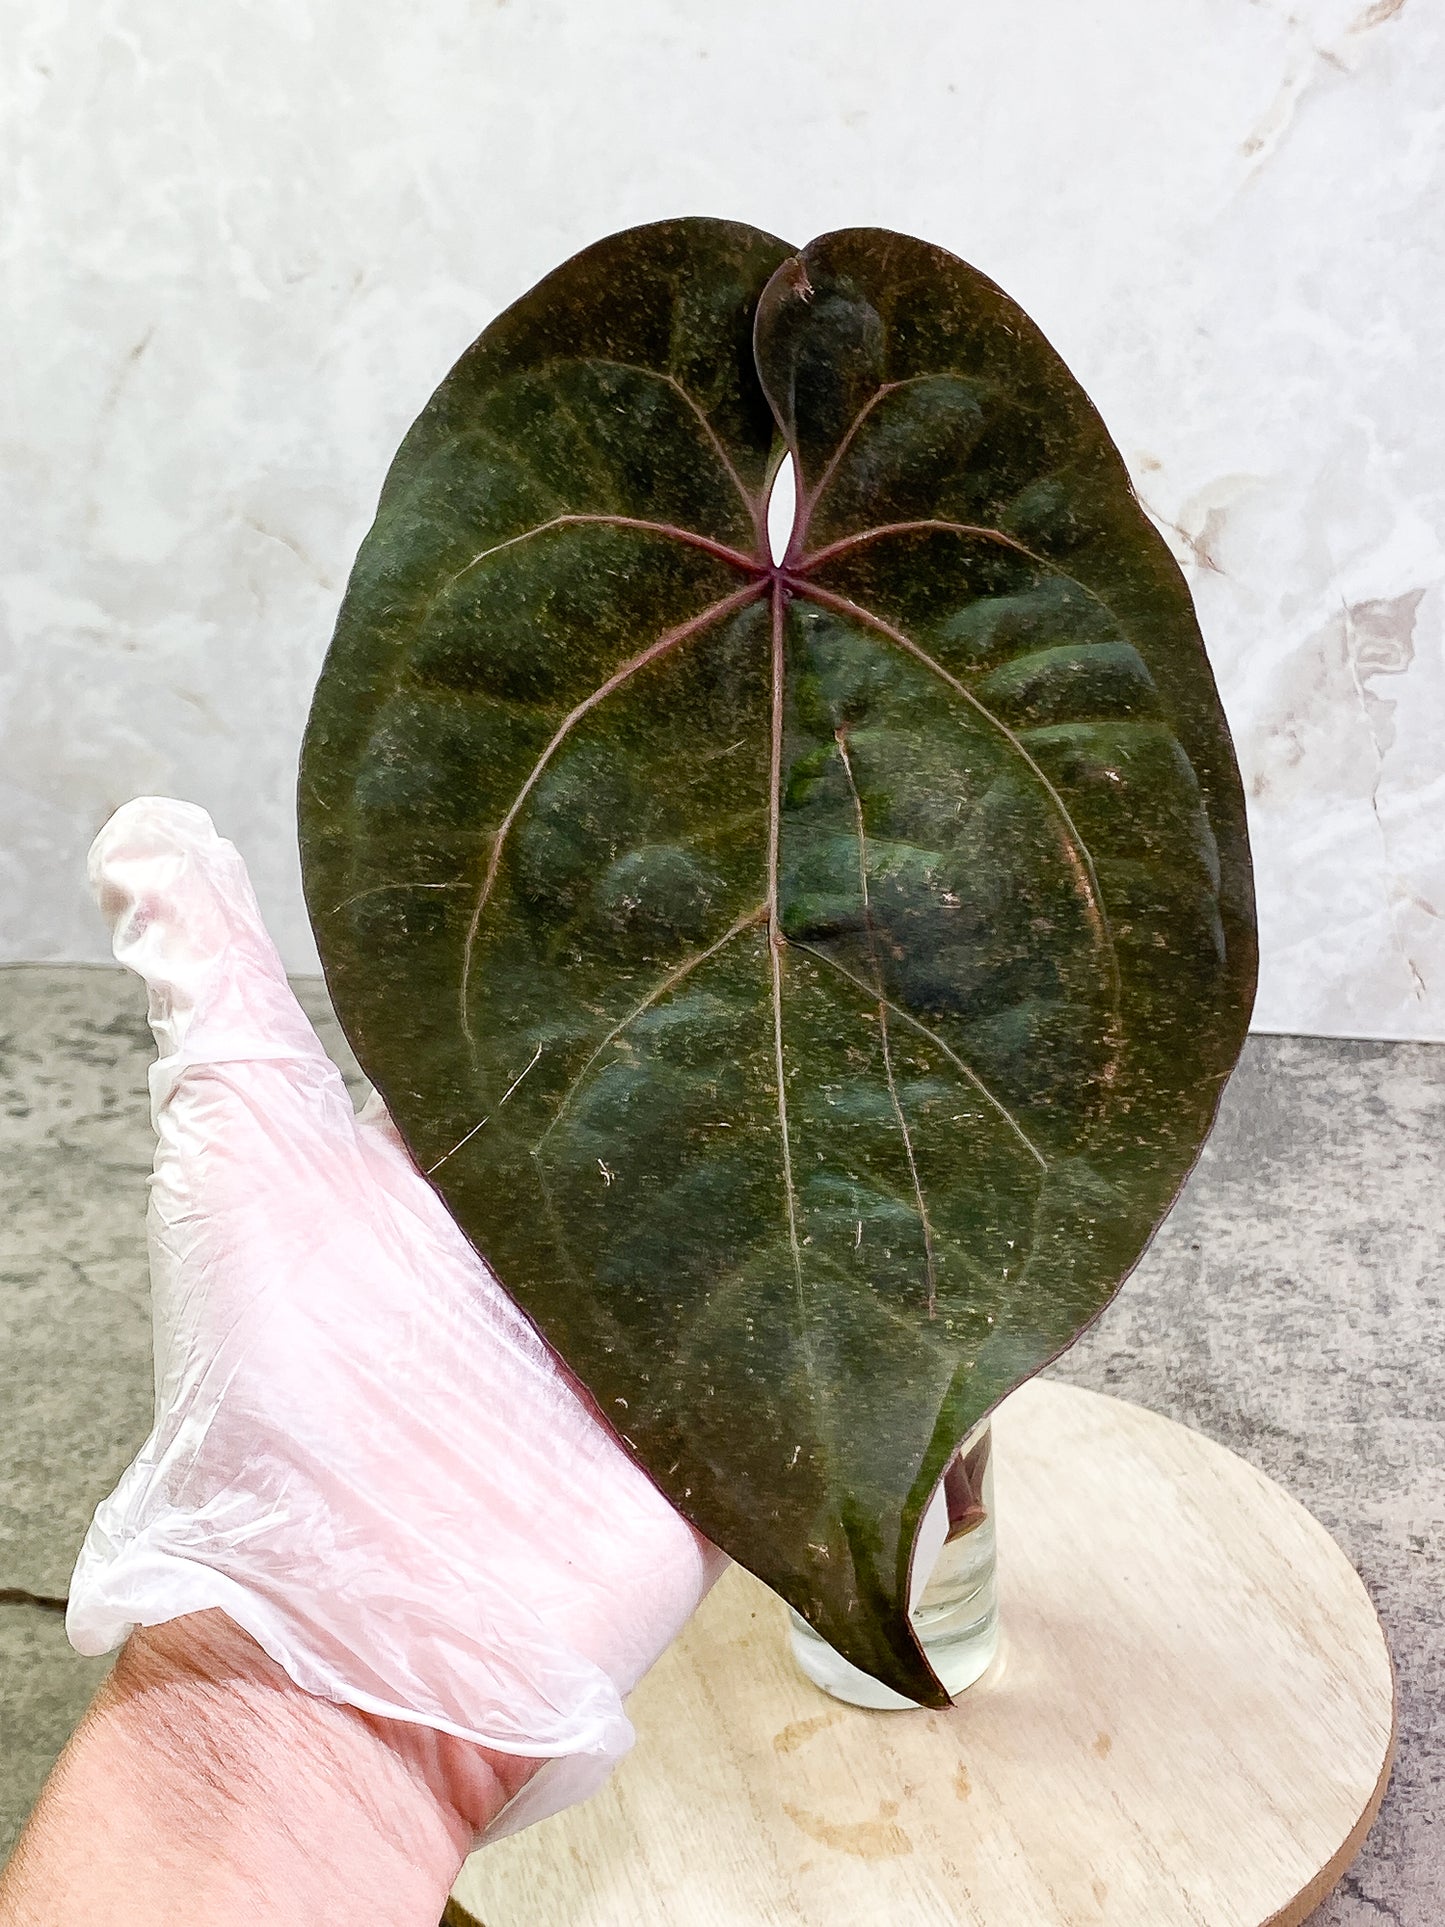 ANTHURIUM ACE OF SPADES 1 leaf 1 sprout Rooting